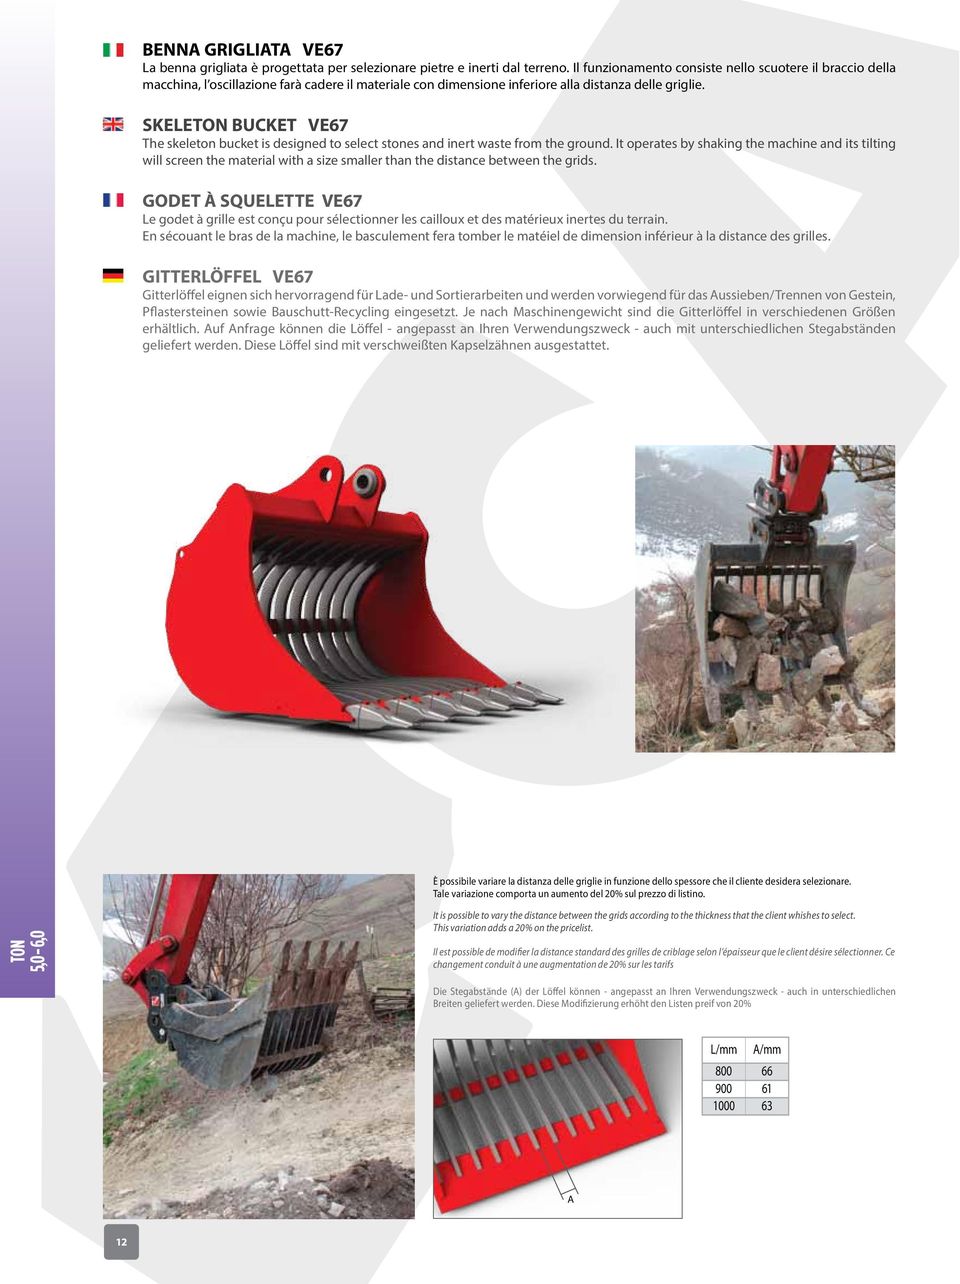 SKELE BUCKET VE67 The skeleton bucket is designed to select stones and inert waste from the ground.